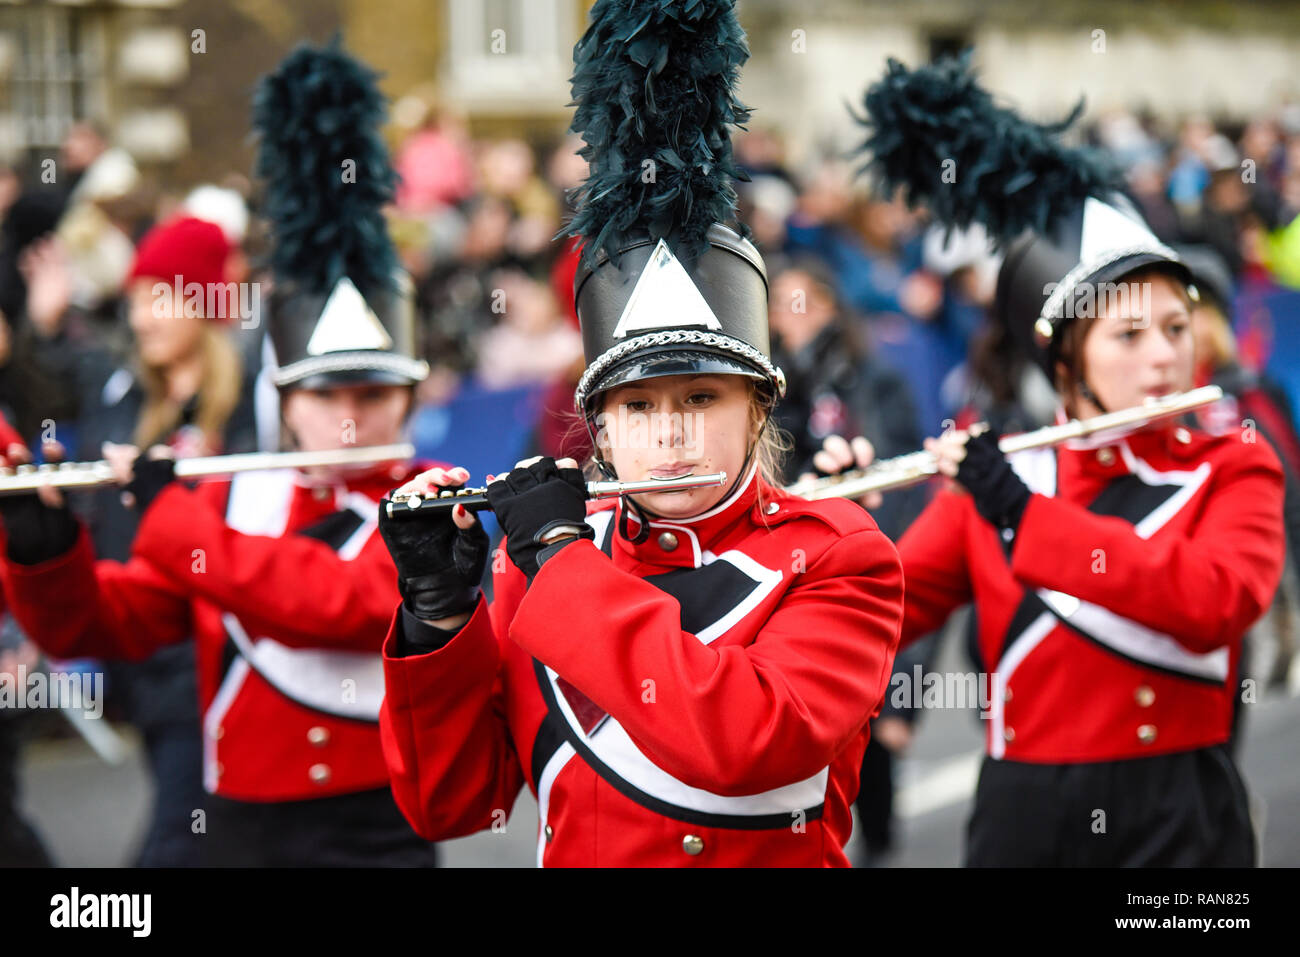 100 Seabreeze High School Marching Band aus Florida, USA, am Tag der Londoner New Year's Parade, UK. Weibliche Bandmitglied Stockfoto